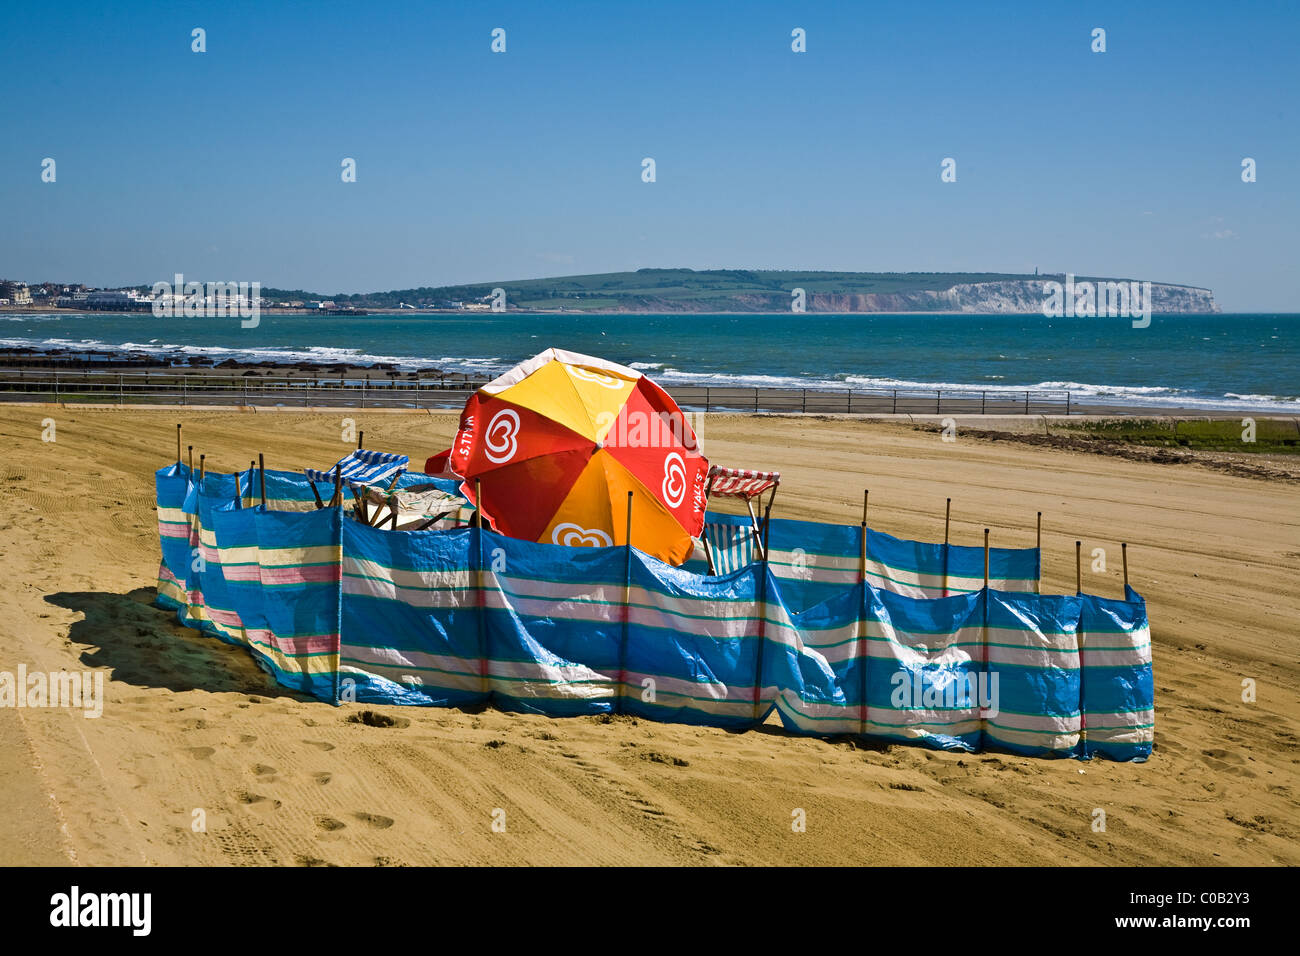 A wind break shelter set up on a beach in Shanklin on the Isle of Wight  Stock Photo - Alamy